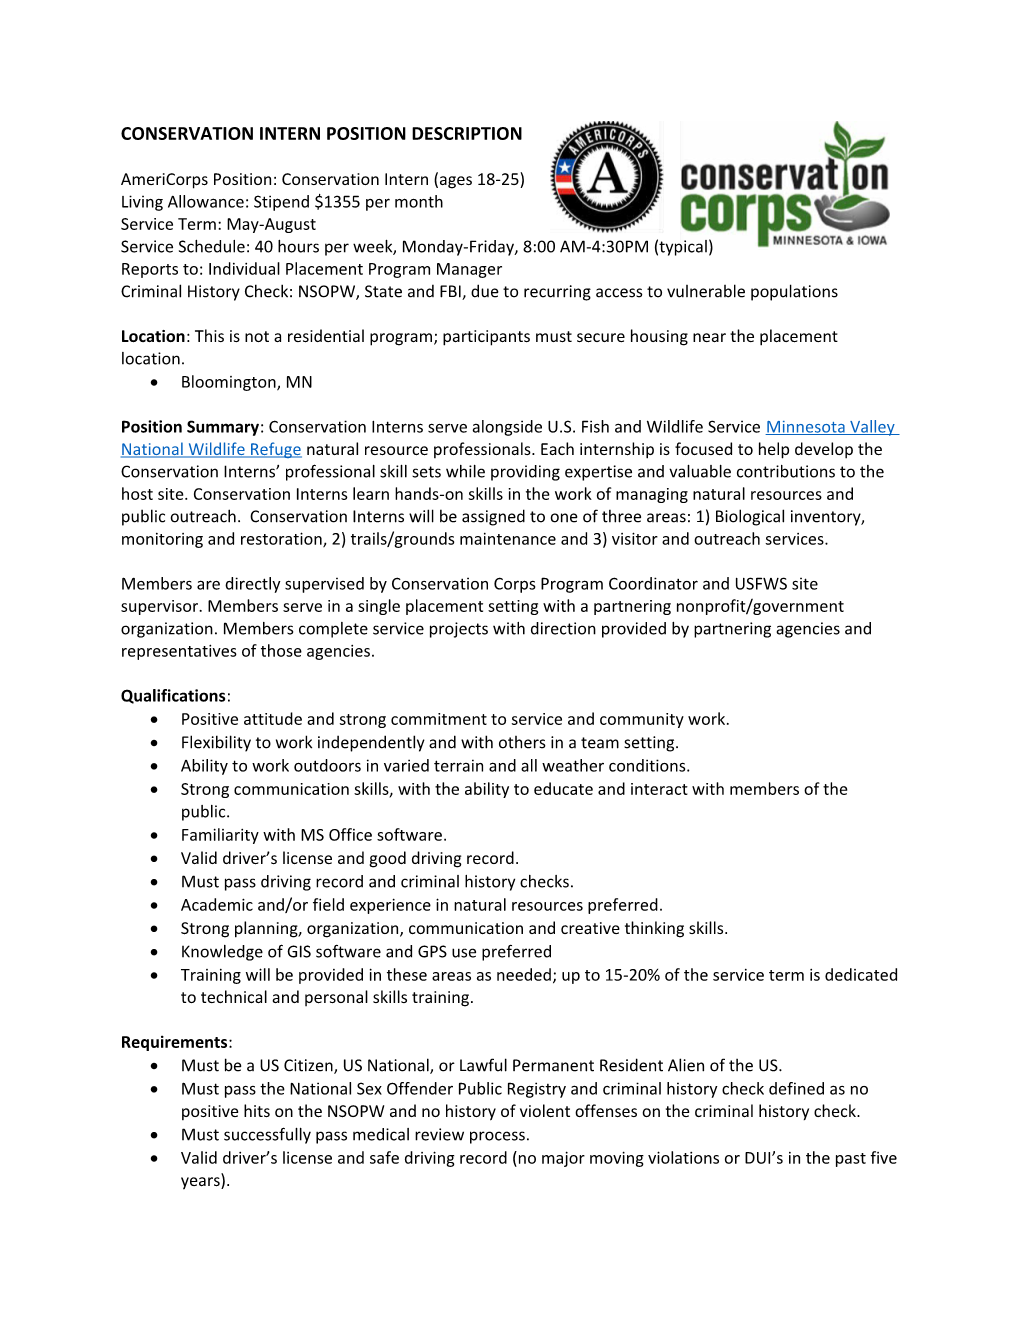 Americorps Position: Conservation Intern (Ages 18-25)